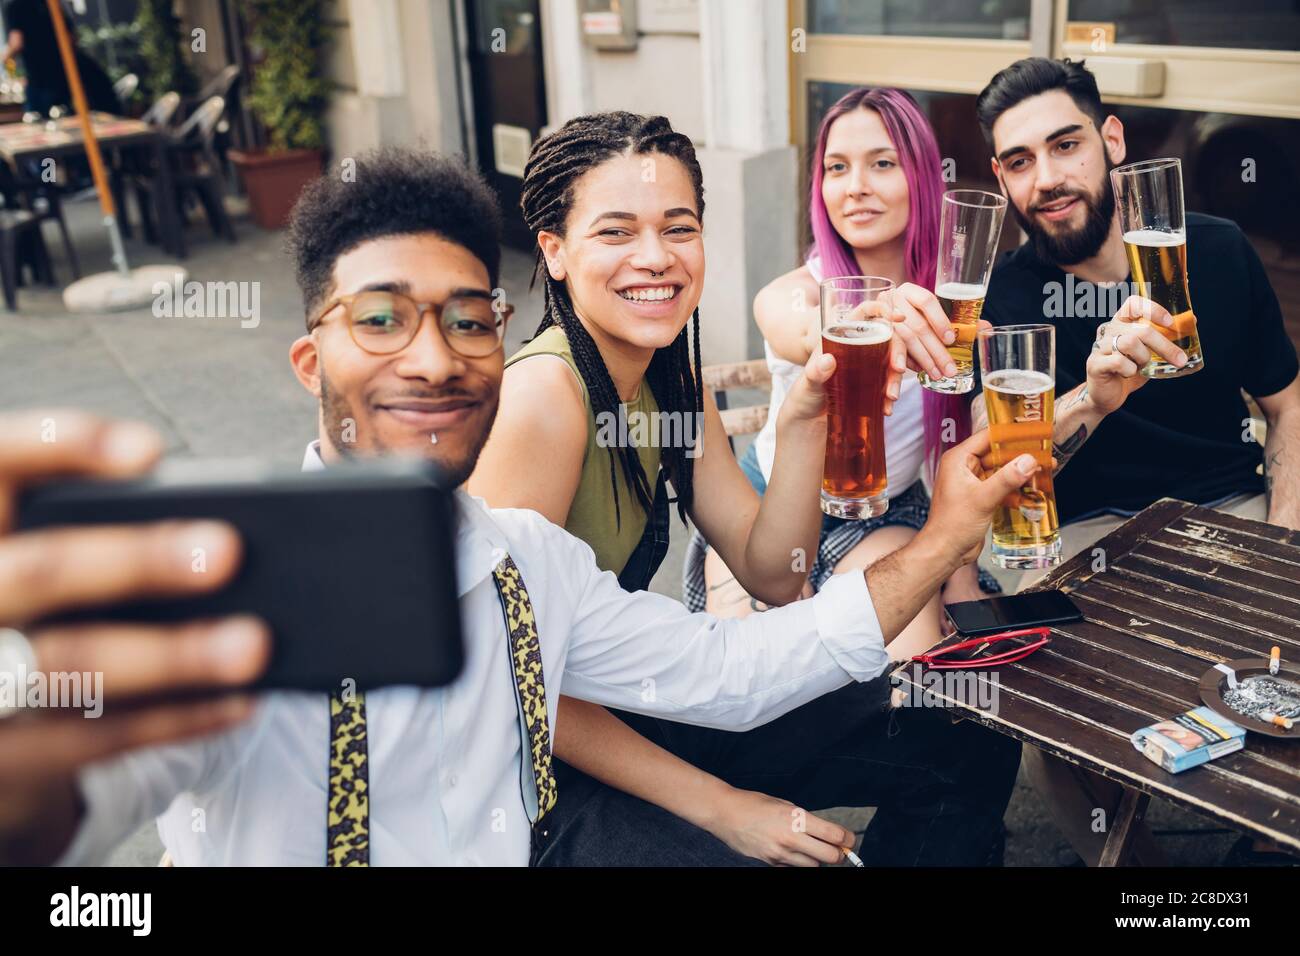 Happy friends holsing beer glasses and taking a selfie outdoors at a bar Stock Photo